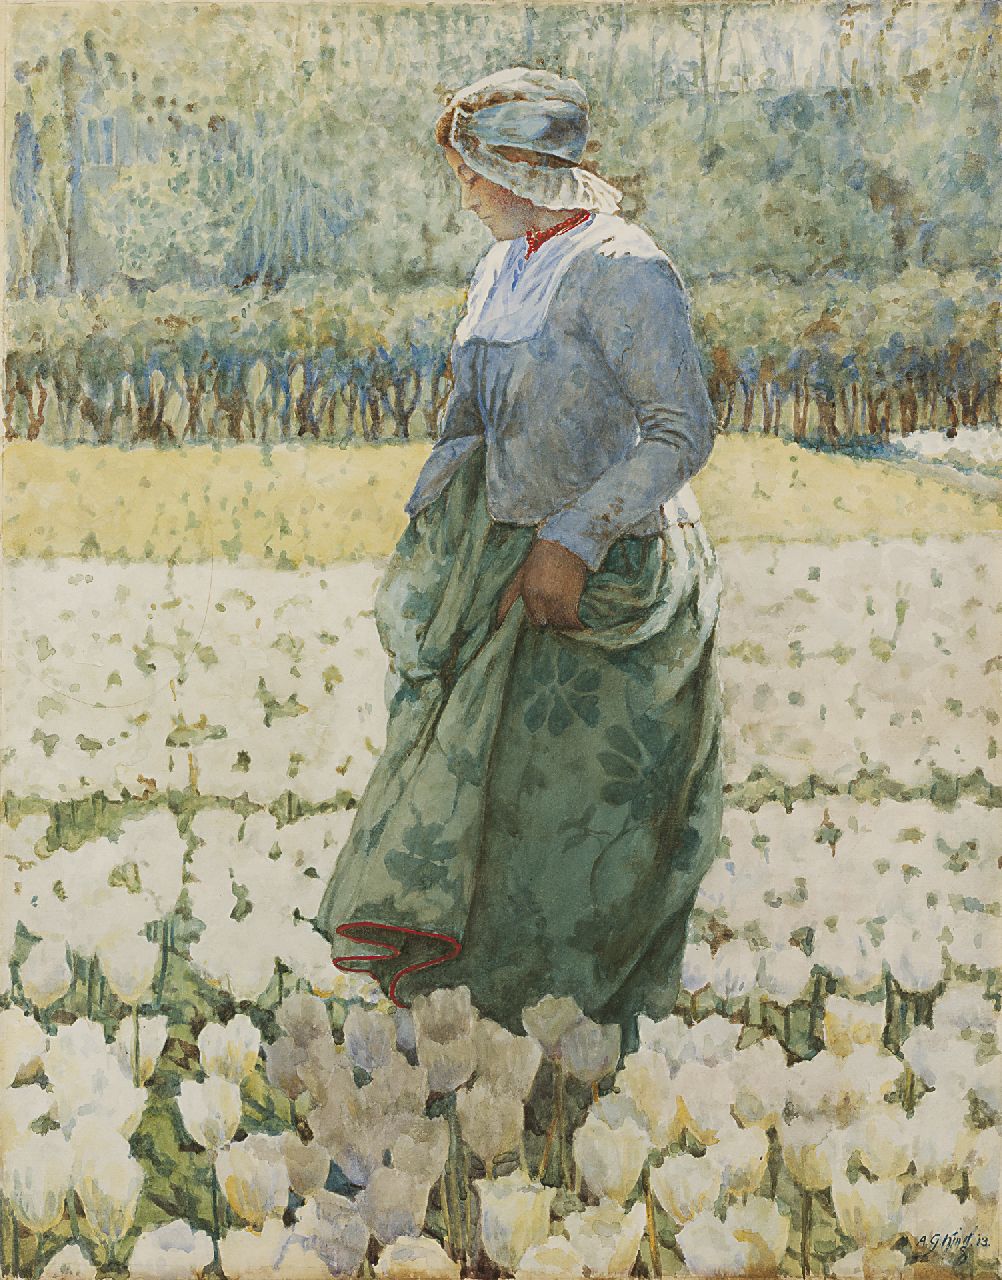 King A.G.  | Agnes Gardner King, Picking tulips, watercolour on paper 47.4 x 37.3 cm, signed l.r. and dated '13